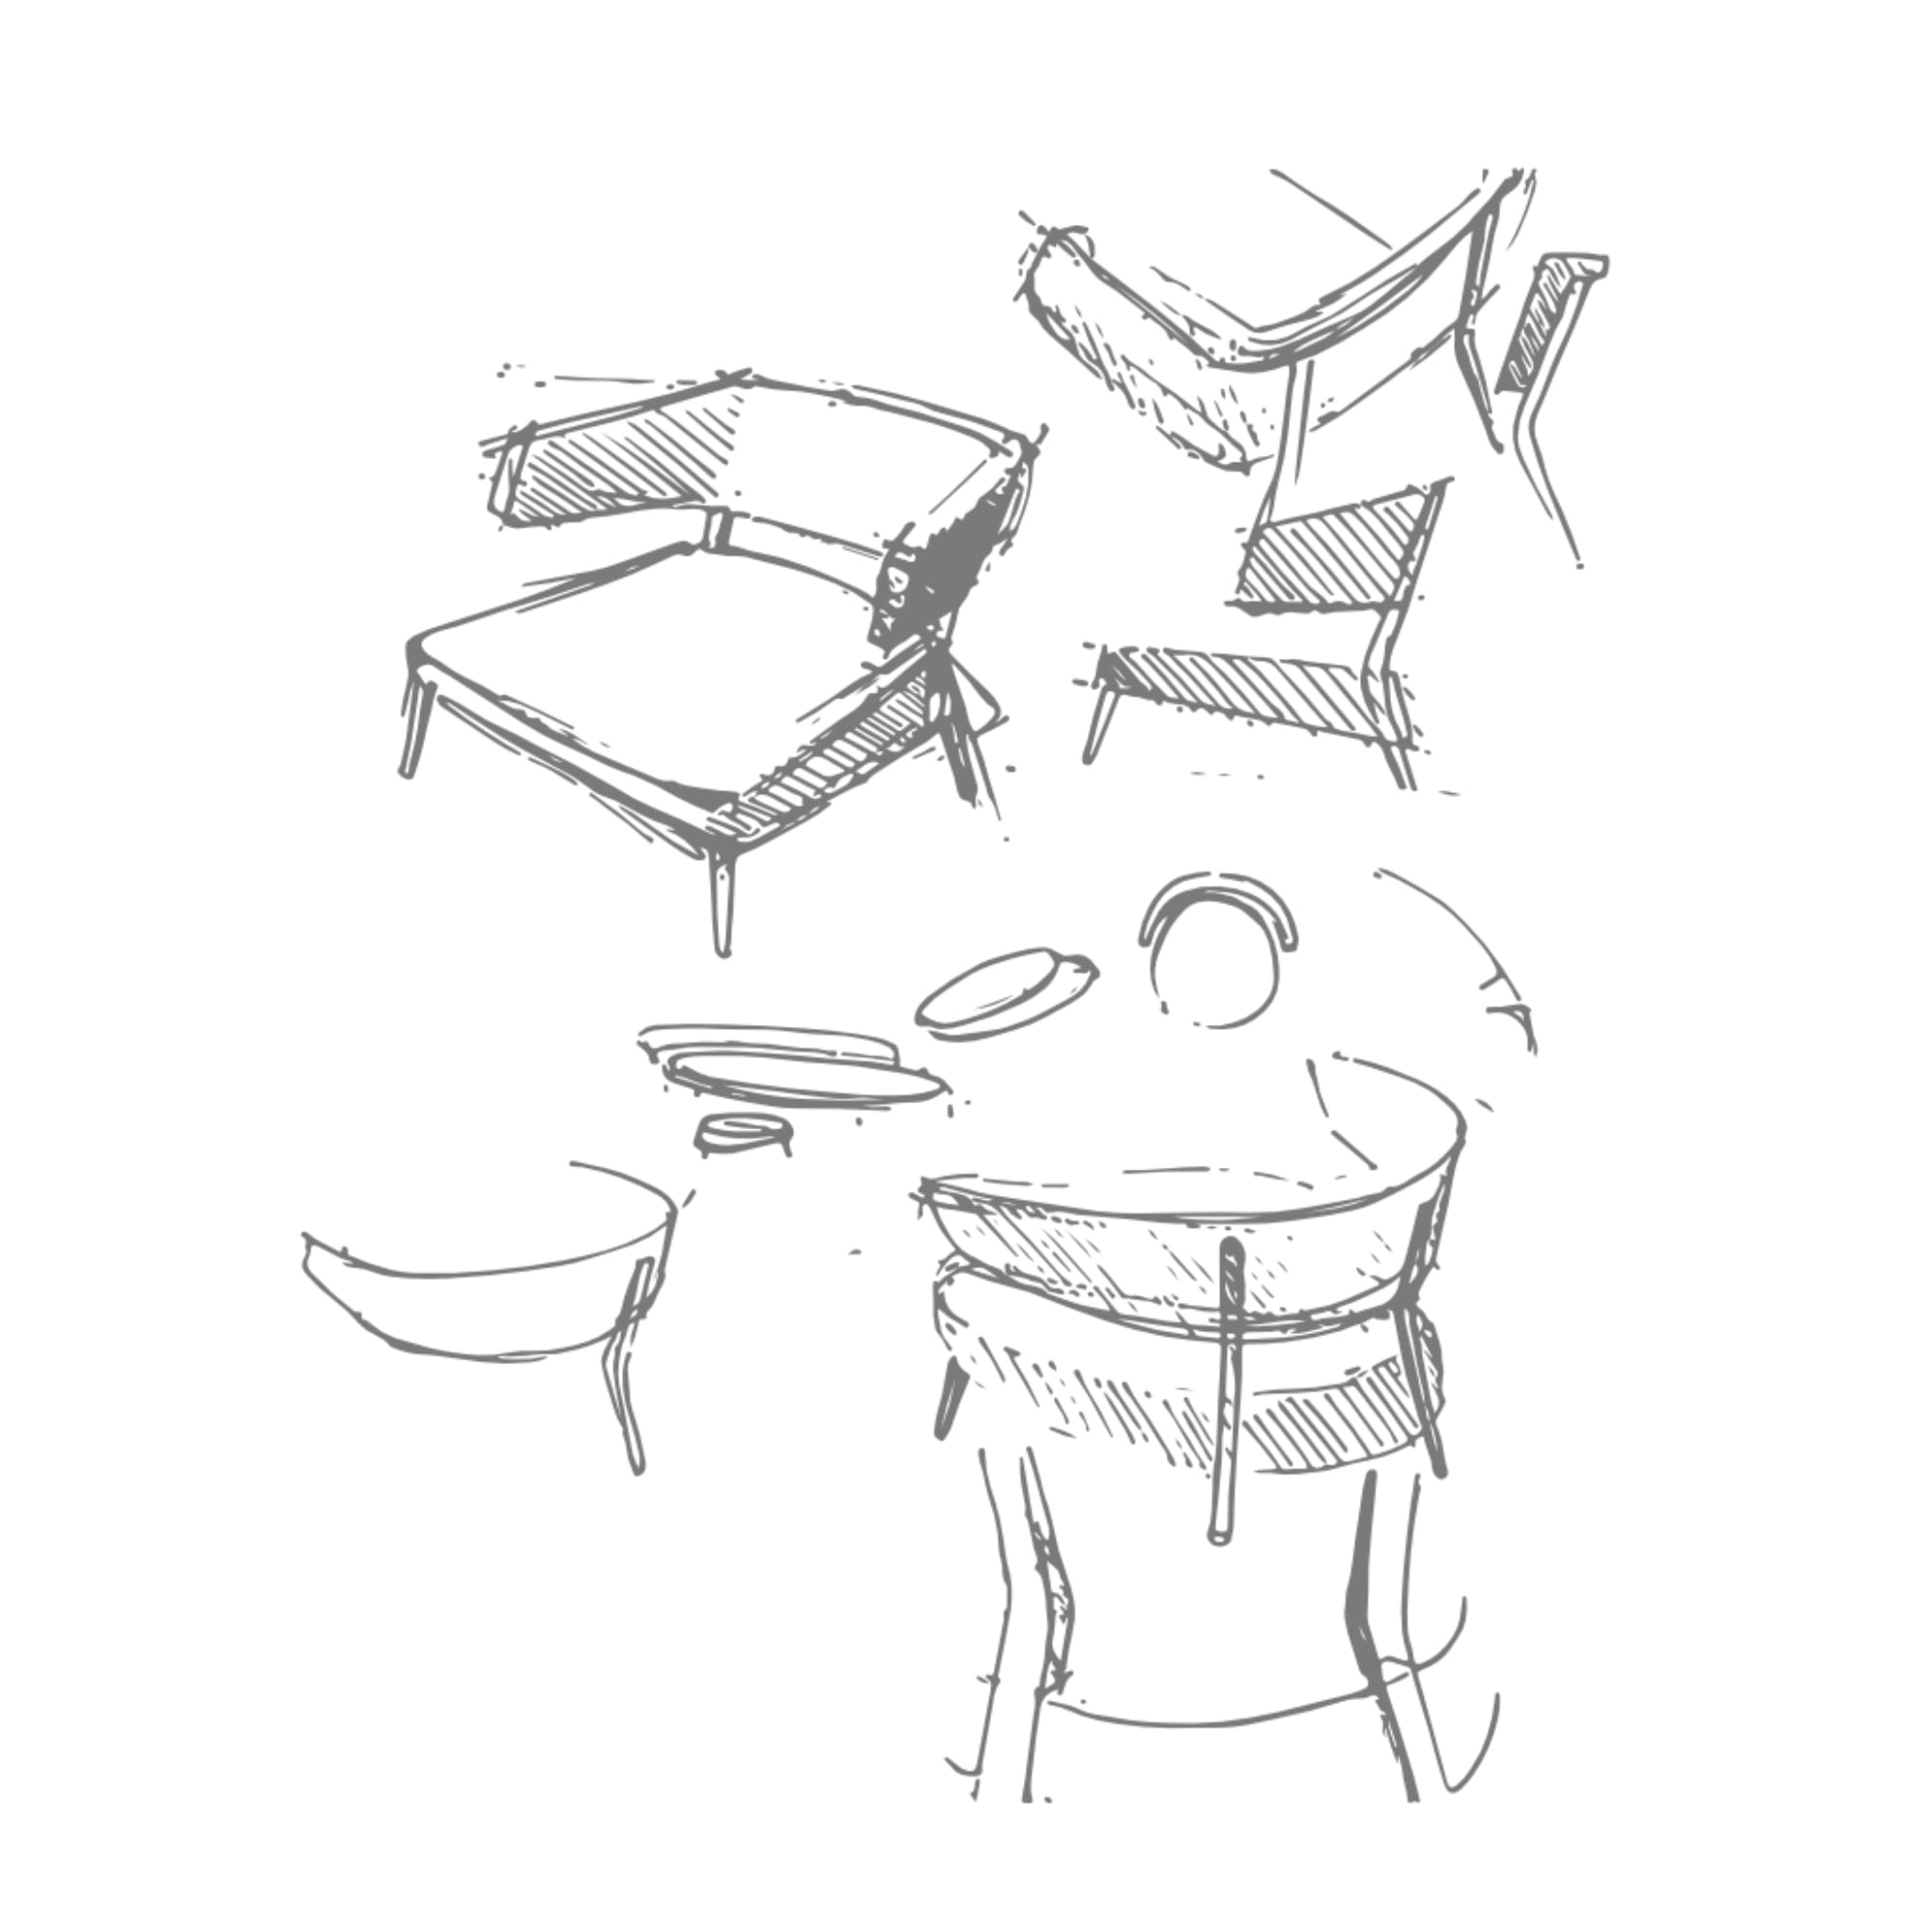 Sketch of Marlon Lounge chair with wide back and seat surface